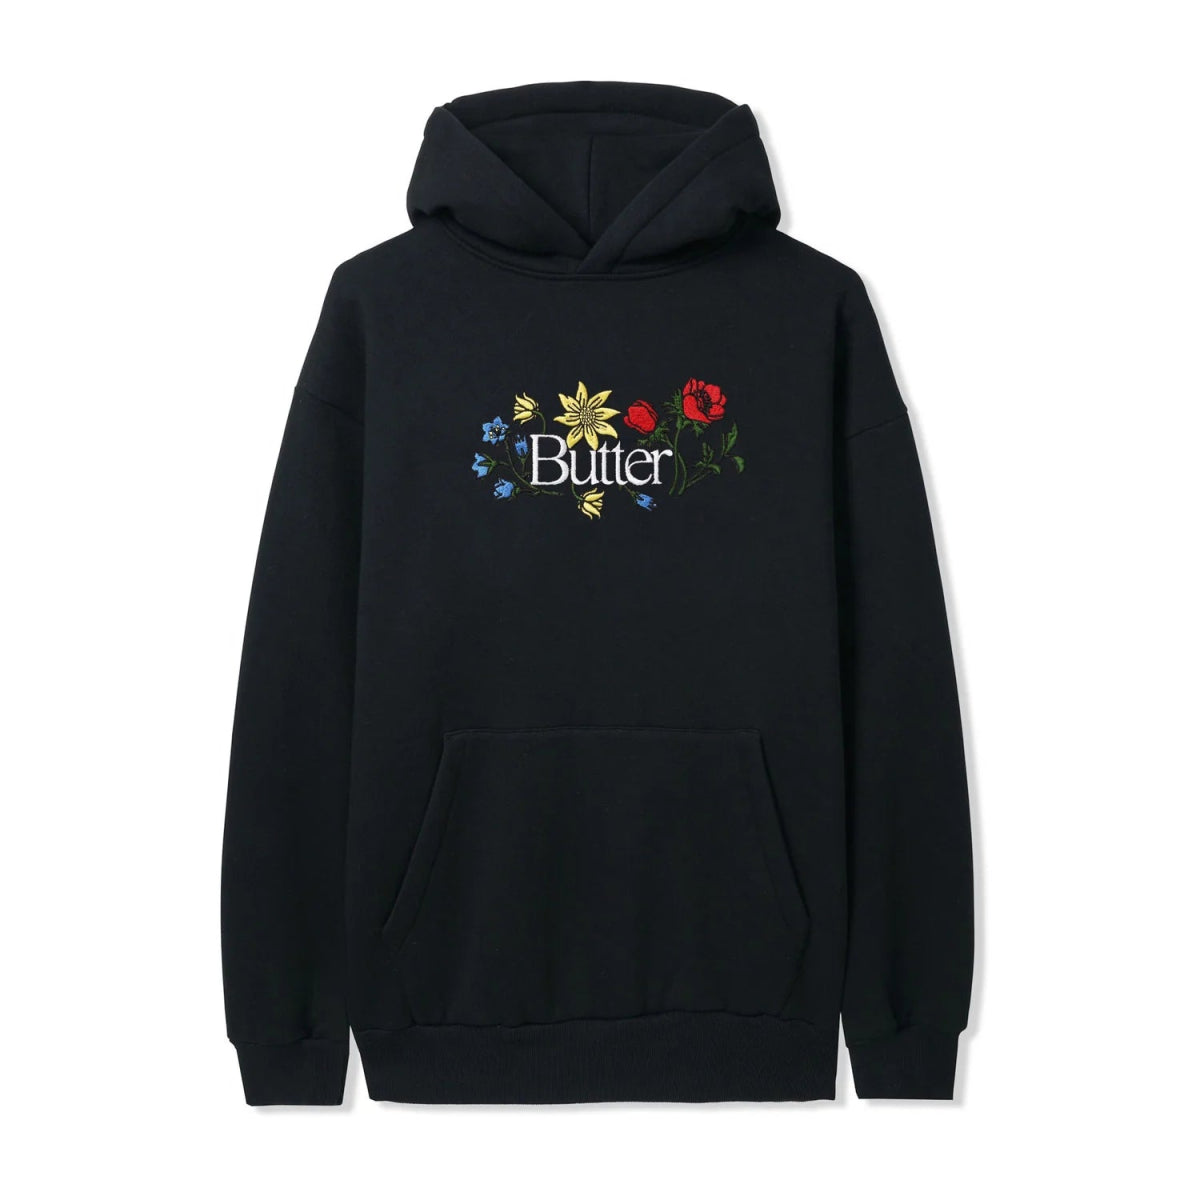 Butter Goods Floral Embroidered Hoody in Black - Goodnews Skateshop